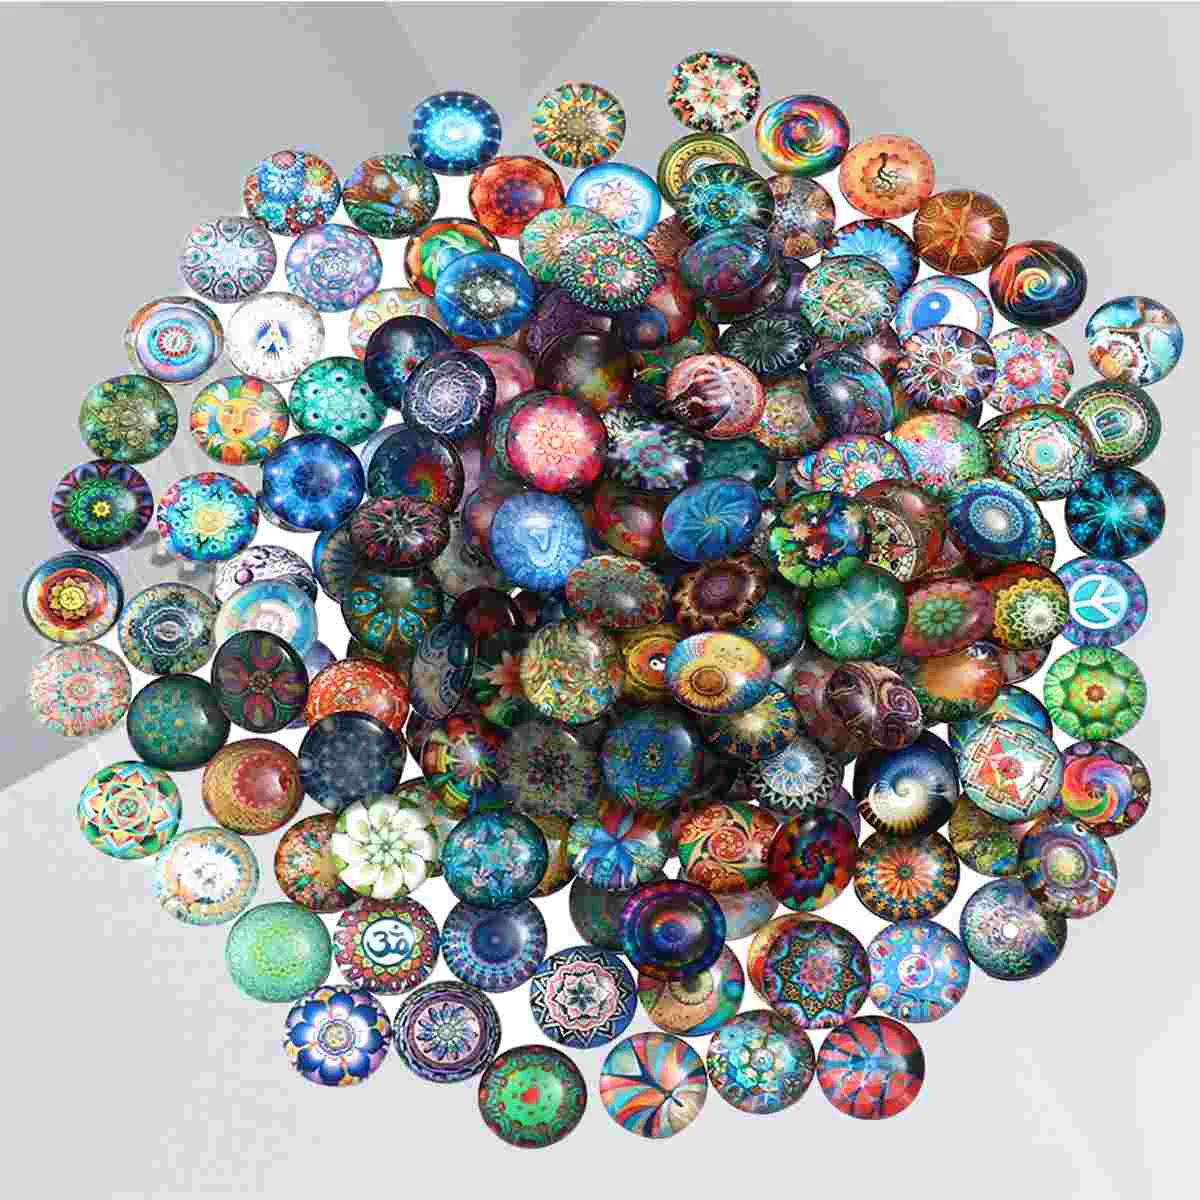 Mosaic Tilesglass Round Flatback Jewelry Suppliescrafts Mixed Charms Pendant Snap Gemstones Resin Decoration Cab Dome Making